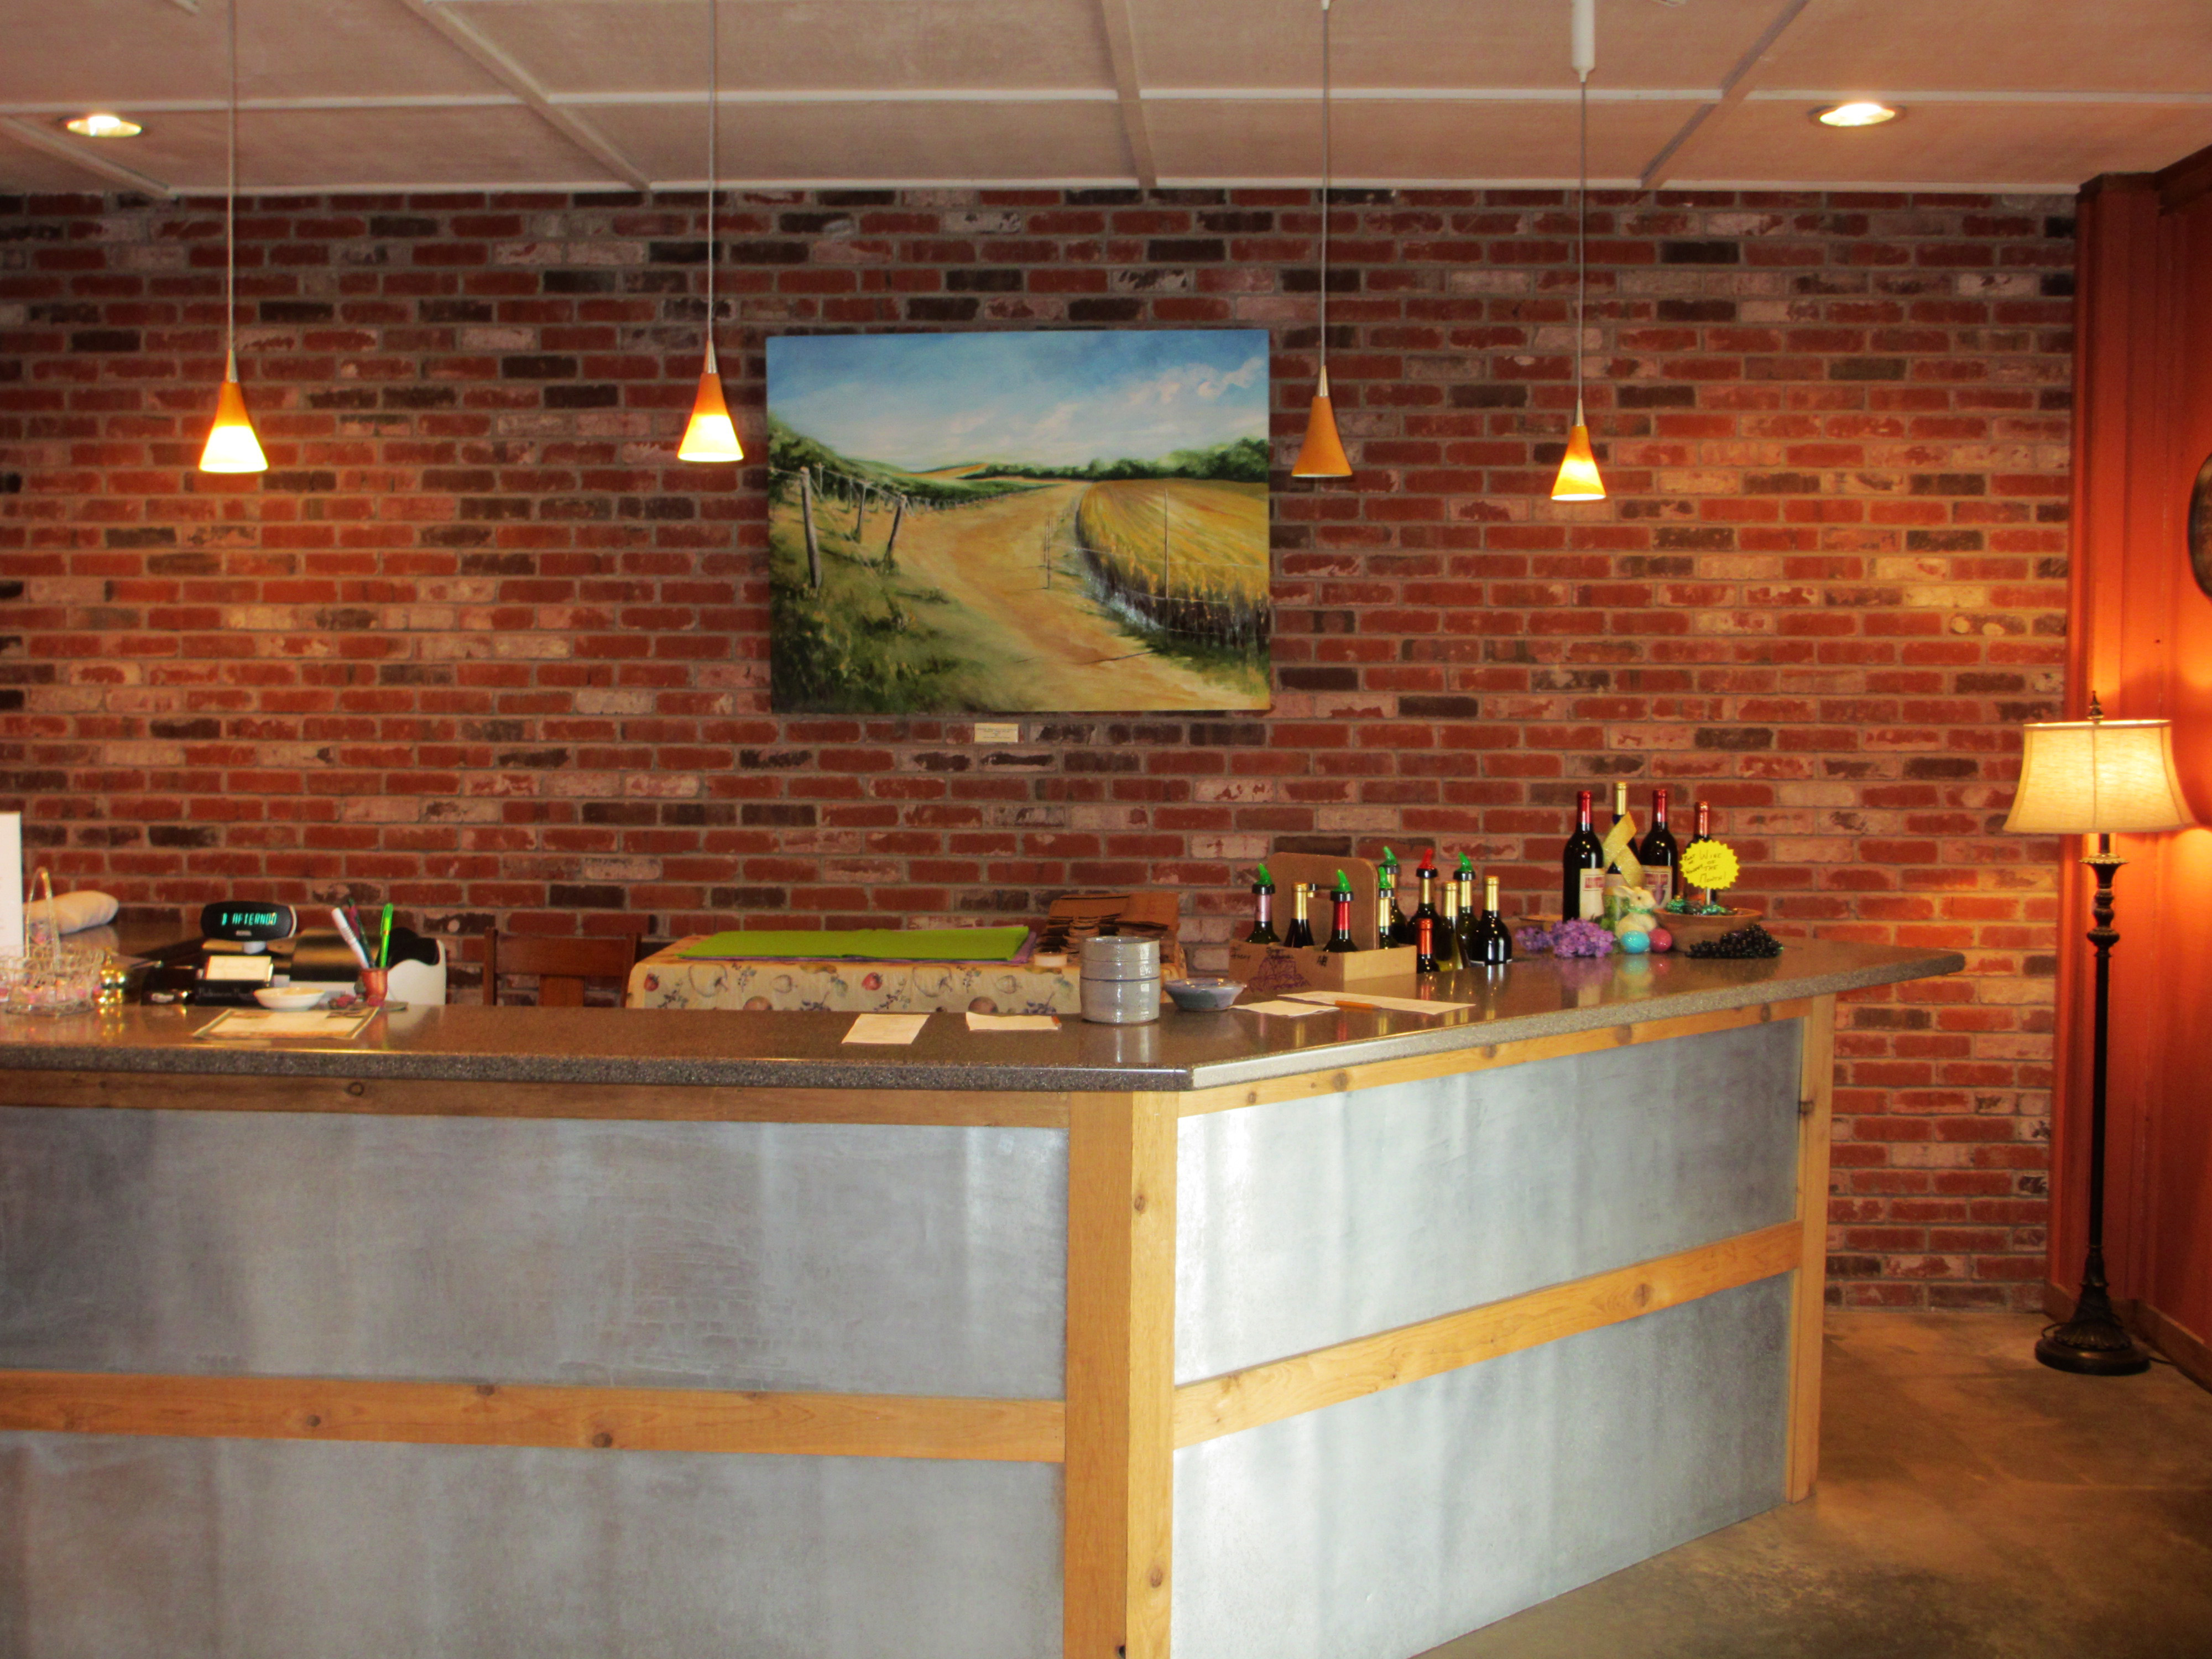 Baltimore Bend Vineyard - interior photo, a bar area constructed of metal and wood in a room with brick walls and overhead lighting.